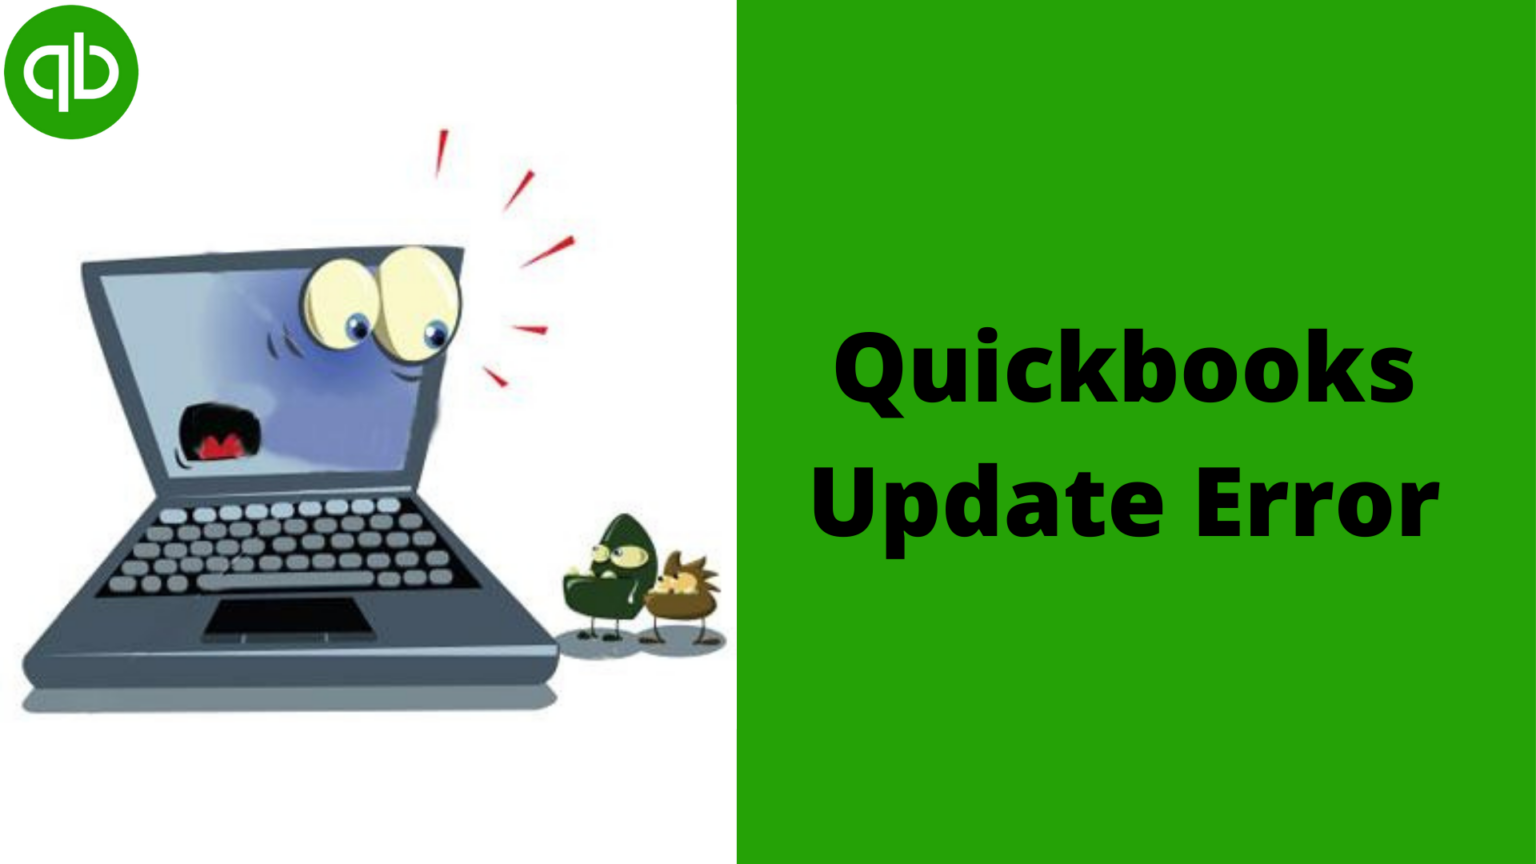 Quickbooks Update Error Codes and Their Solutions